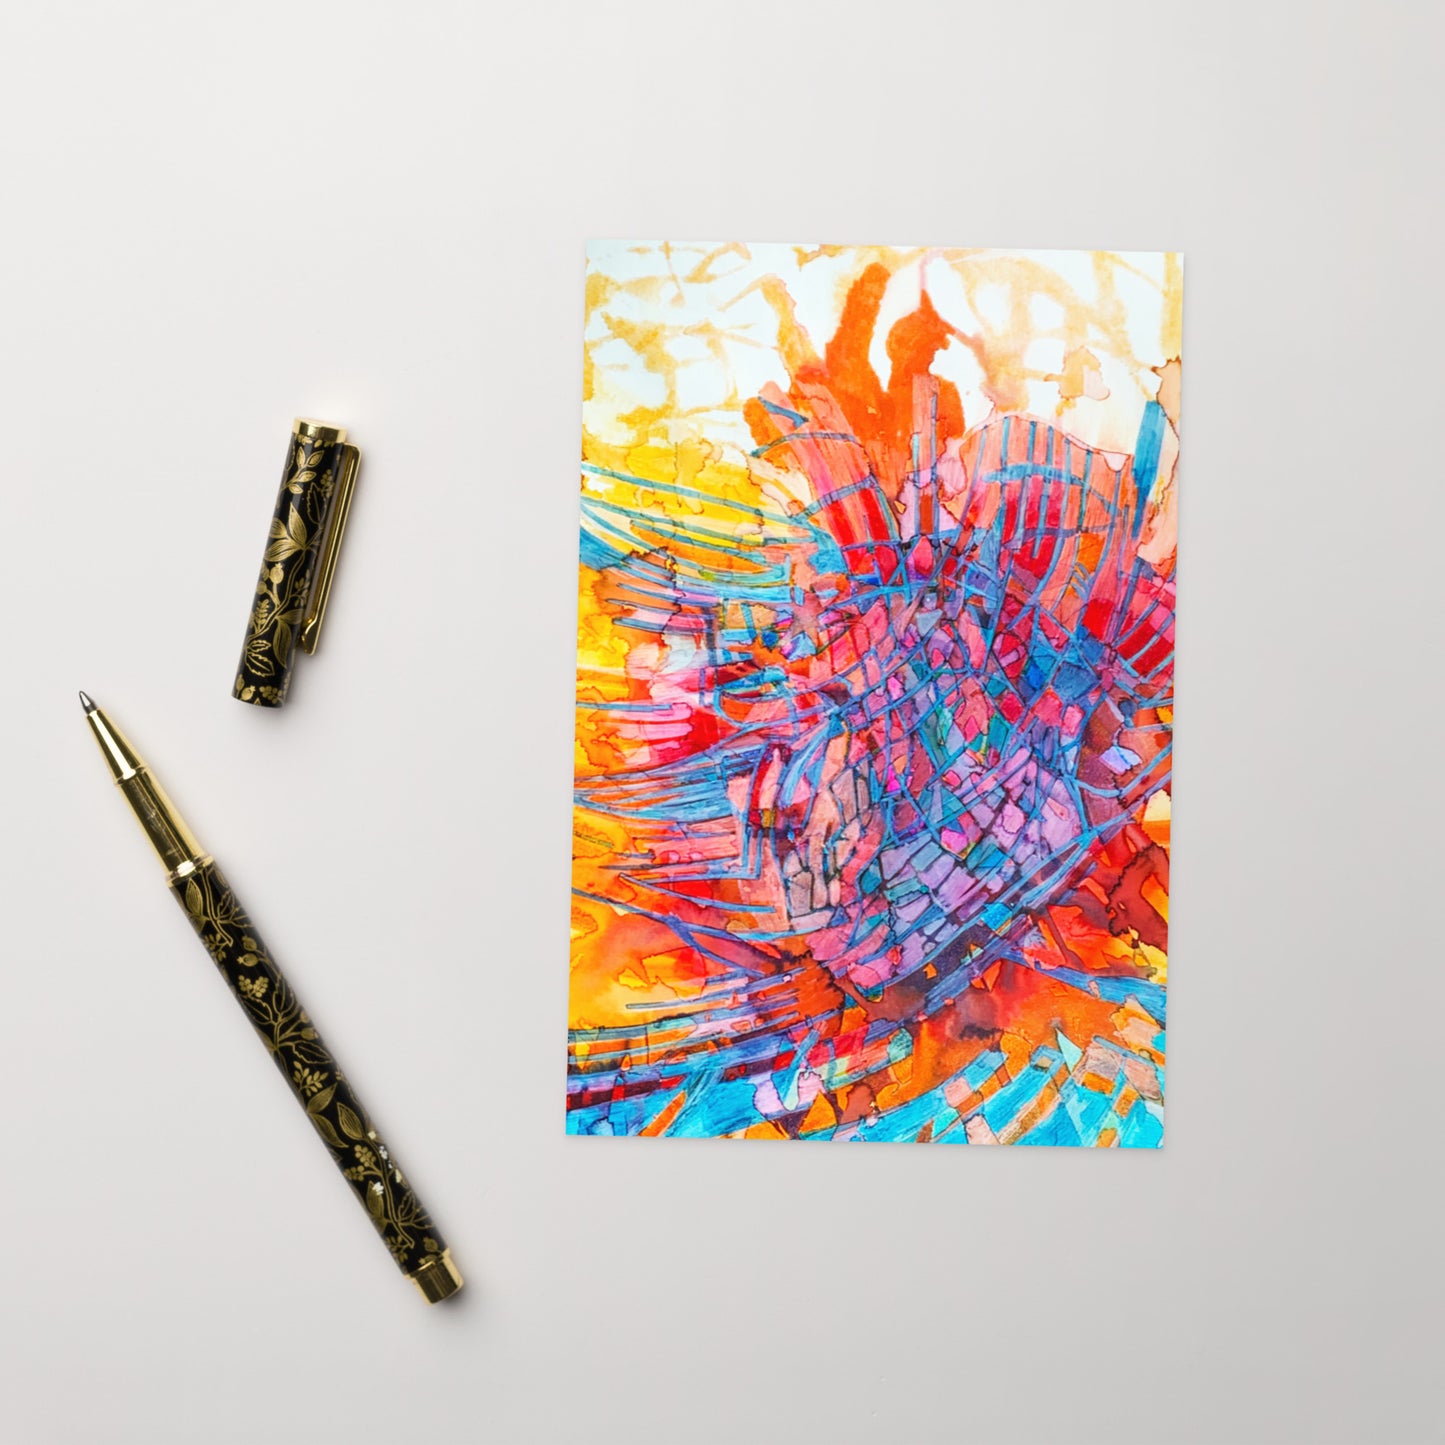 Fire Pit Abstract Greeting card - Art Love Decor